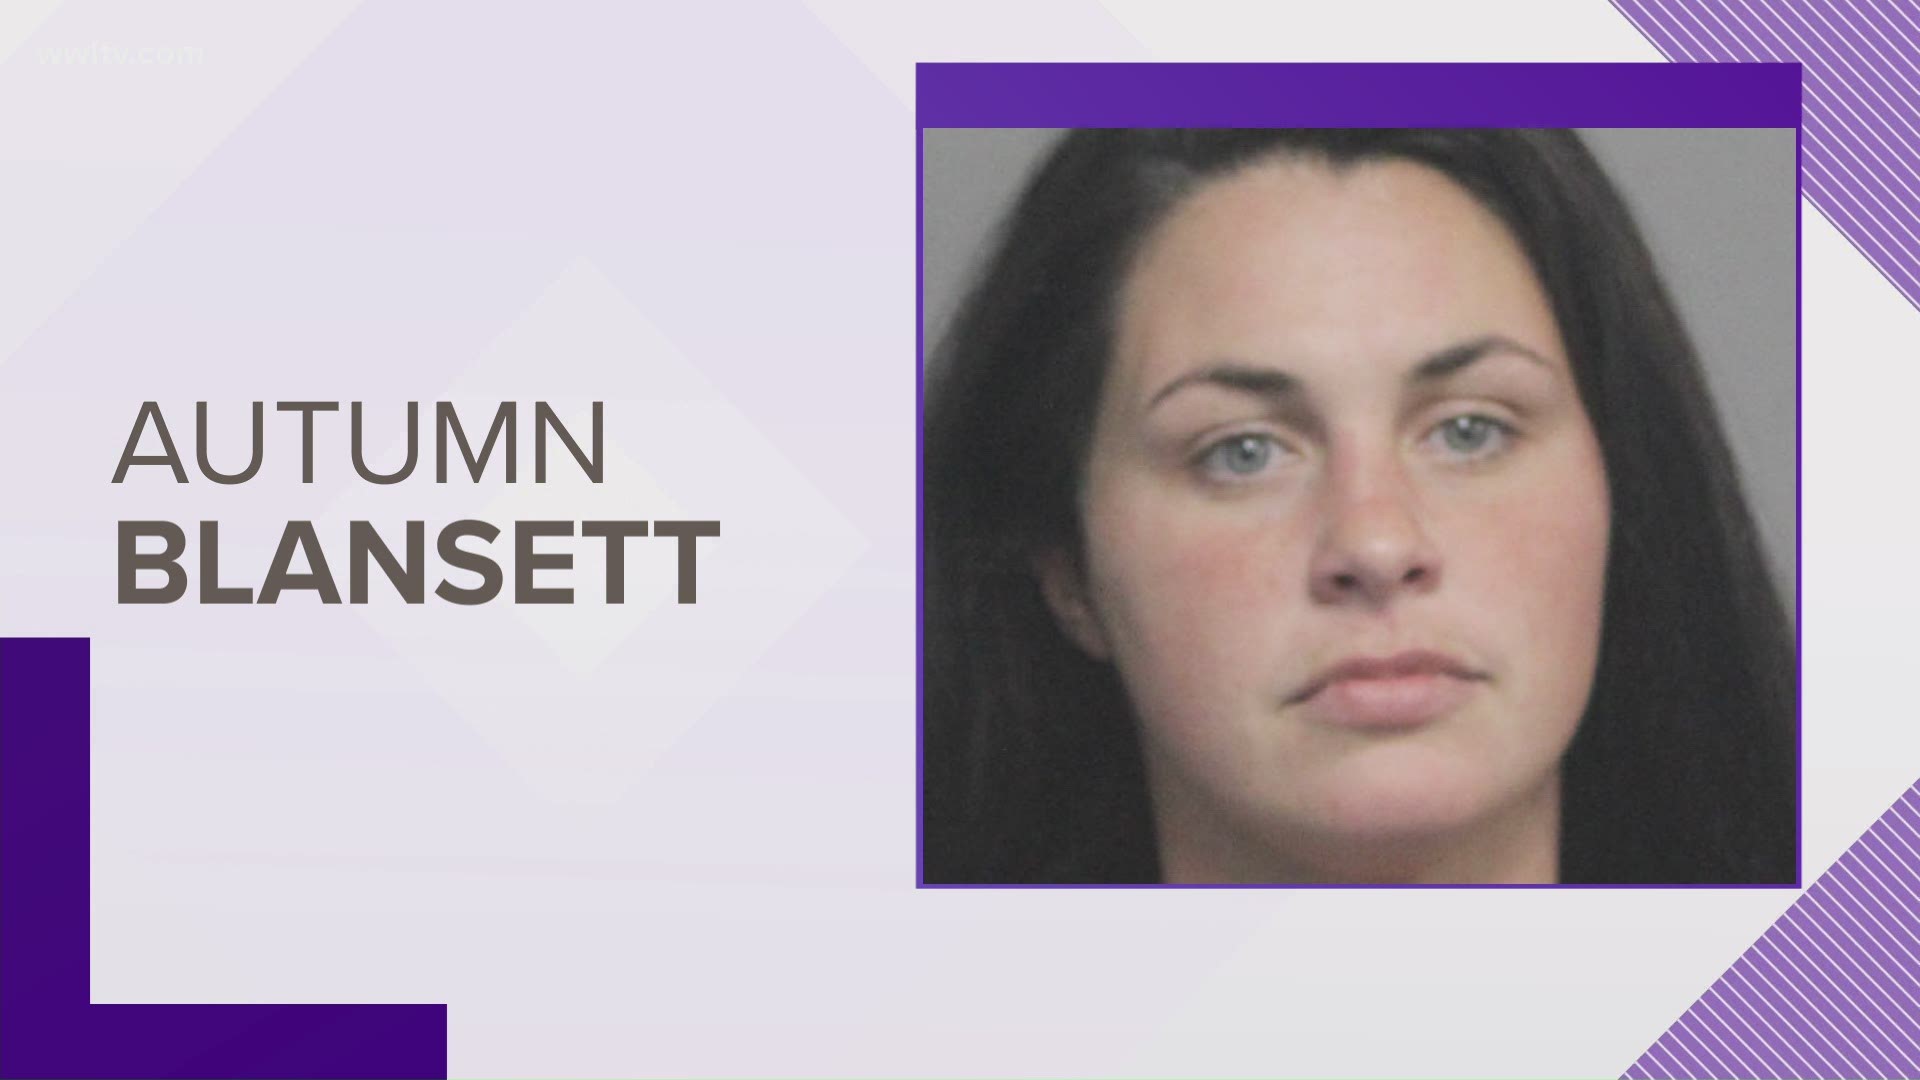 Autumn Blansett is in jail after the death of her 3-month-old baby due to drugs in her milk.